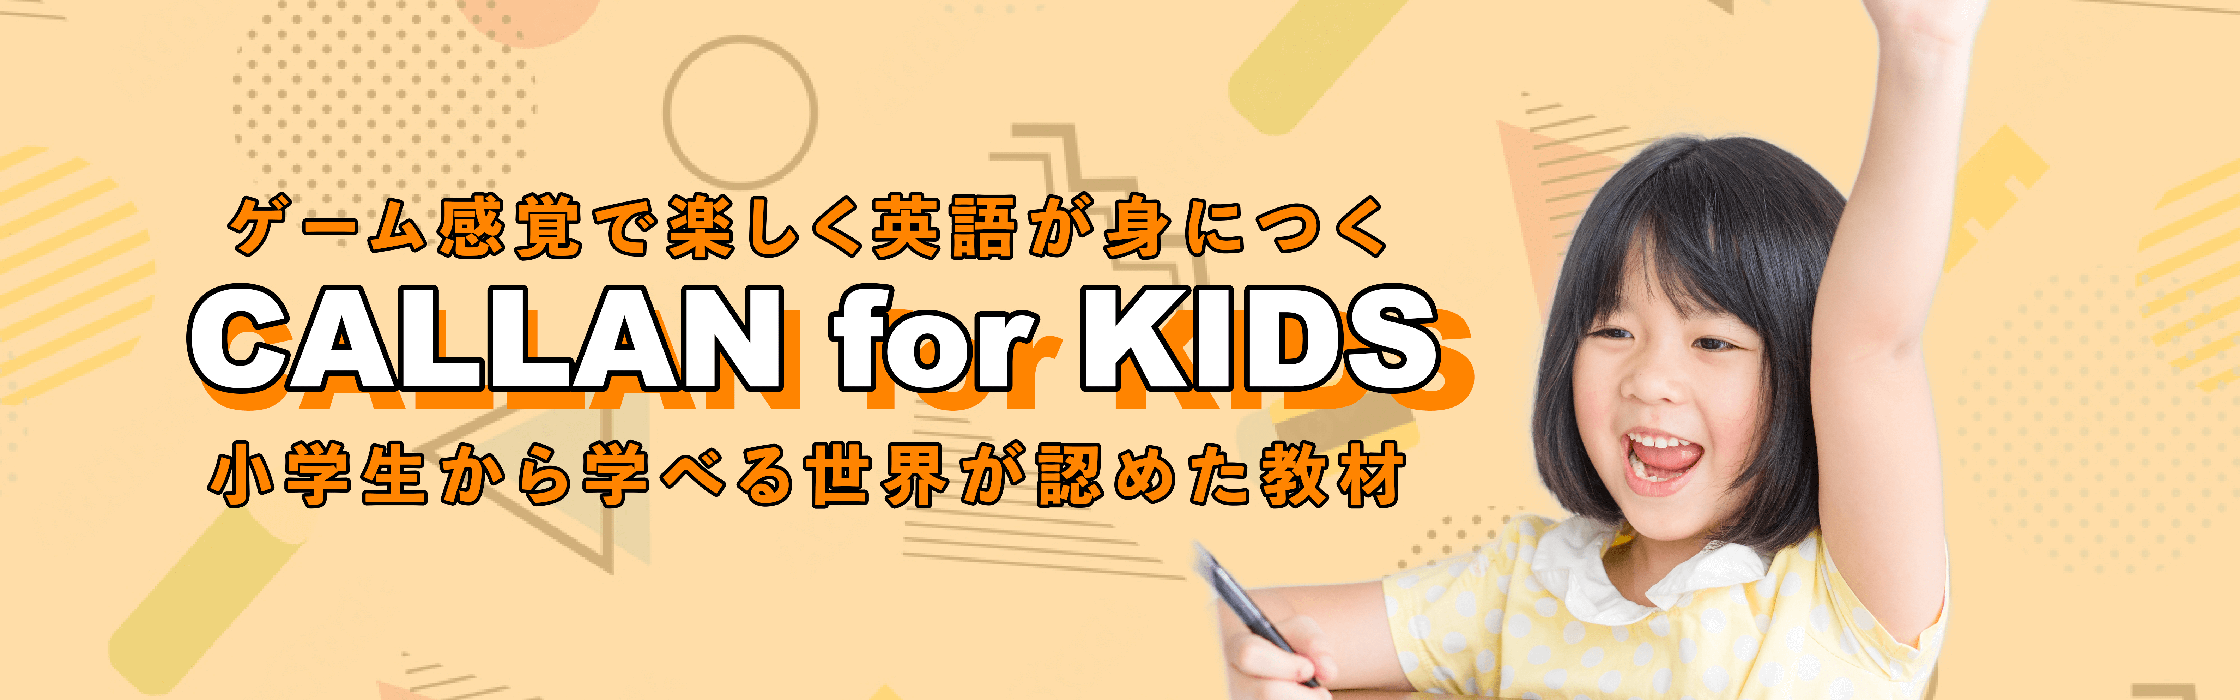 QQキッズの「カラン for KIDS」